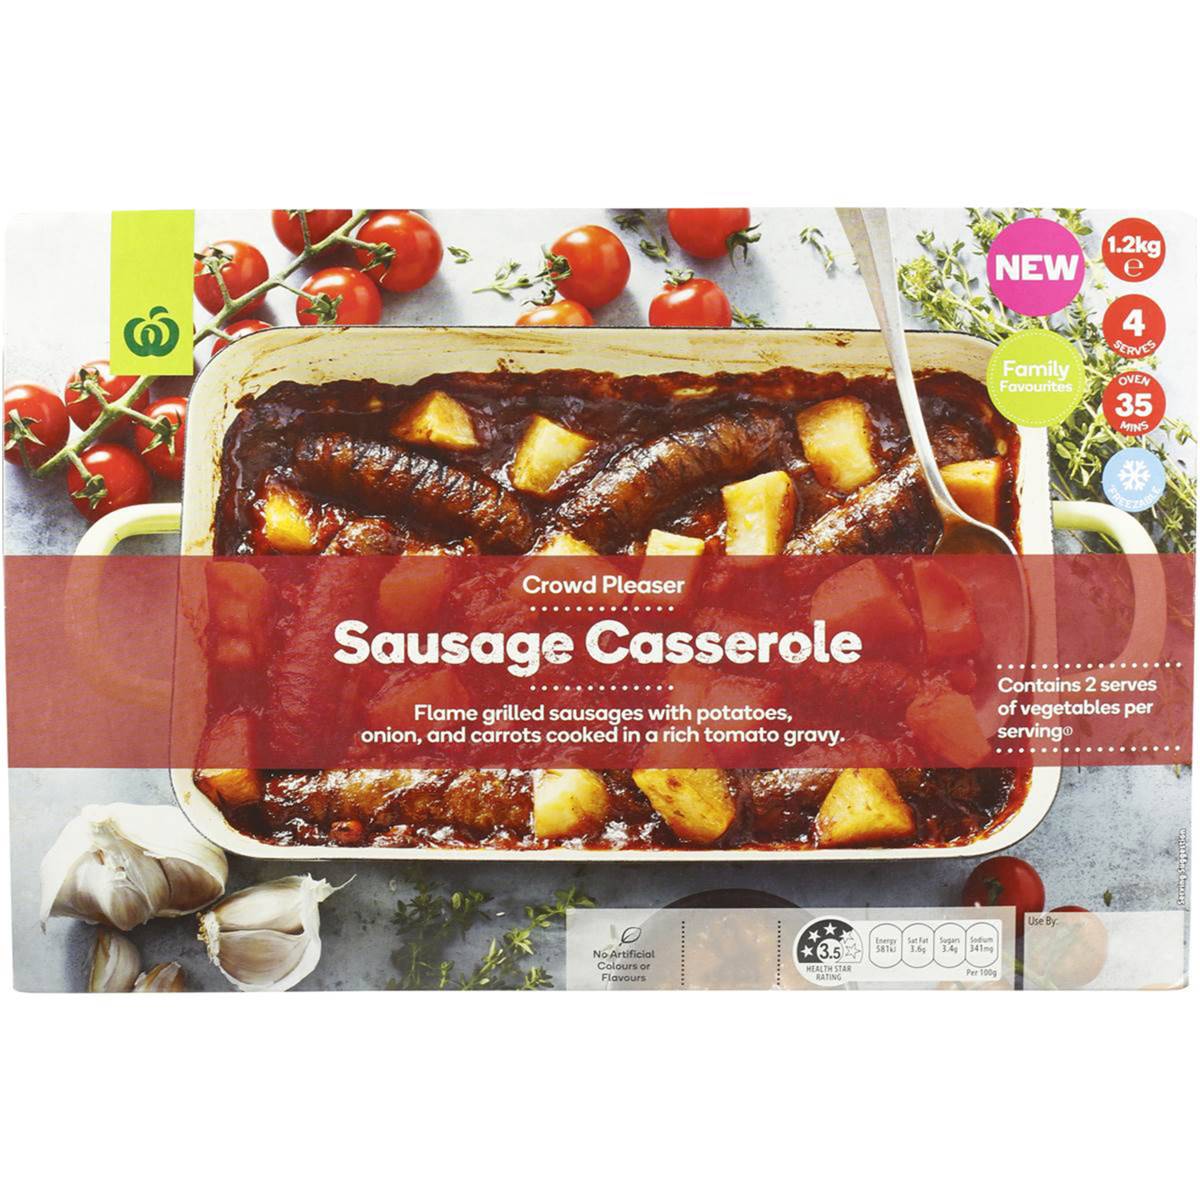 Woolworths Family Favourites Sausage Casserole